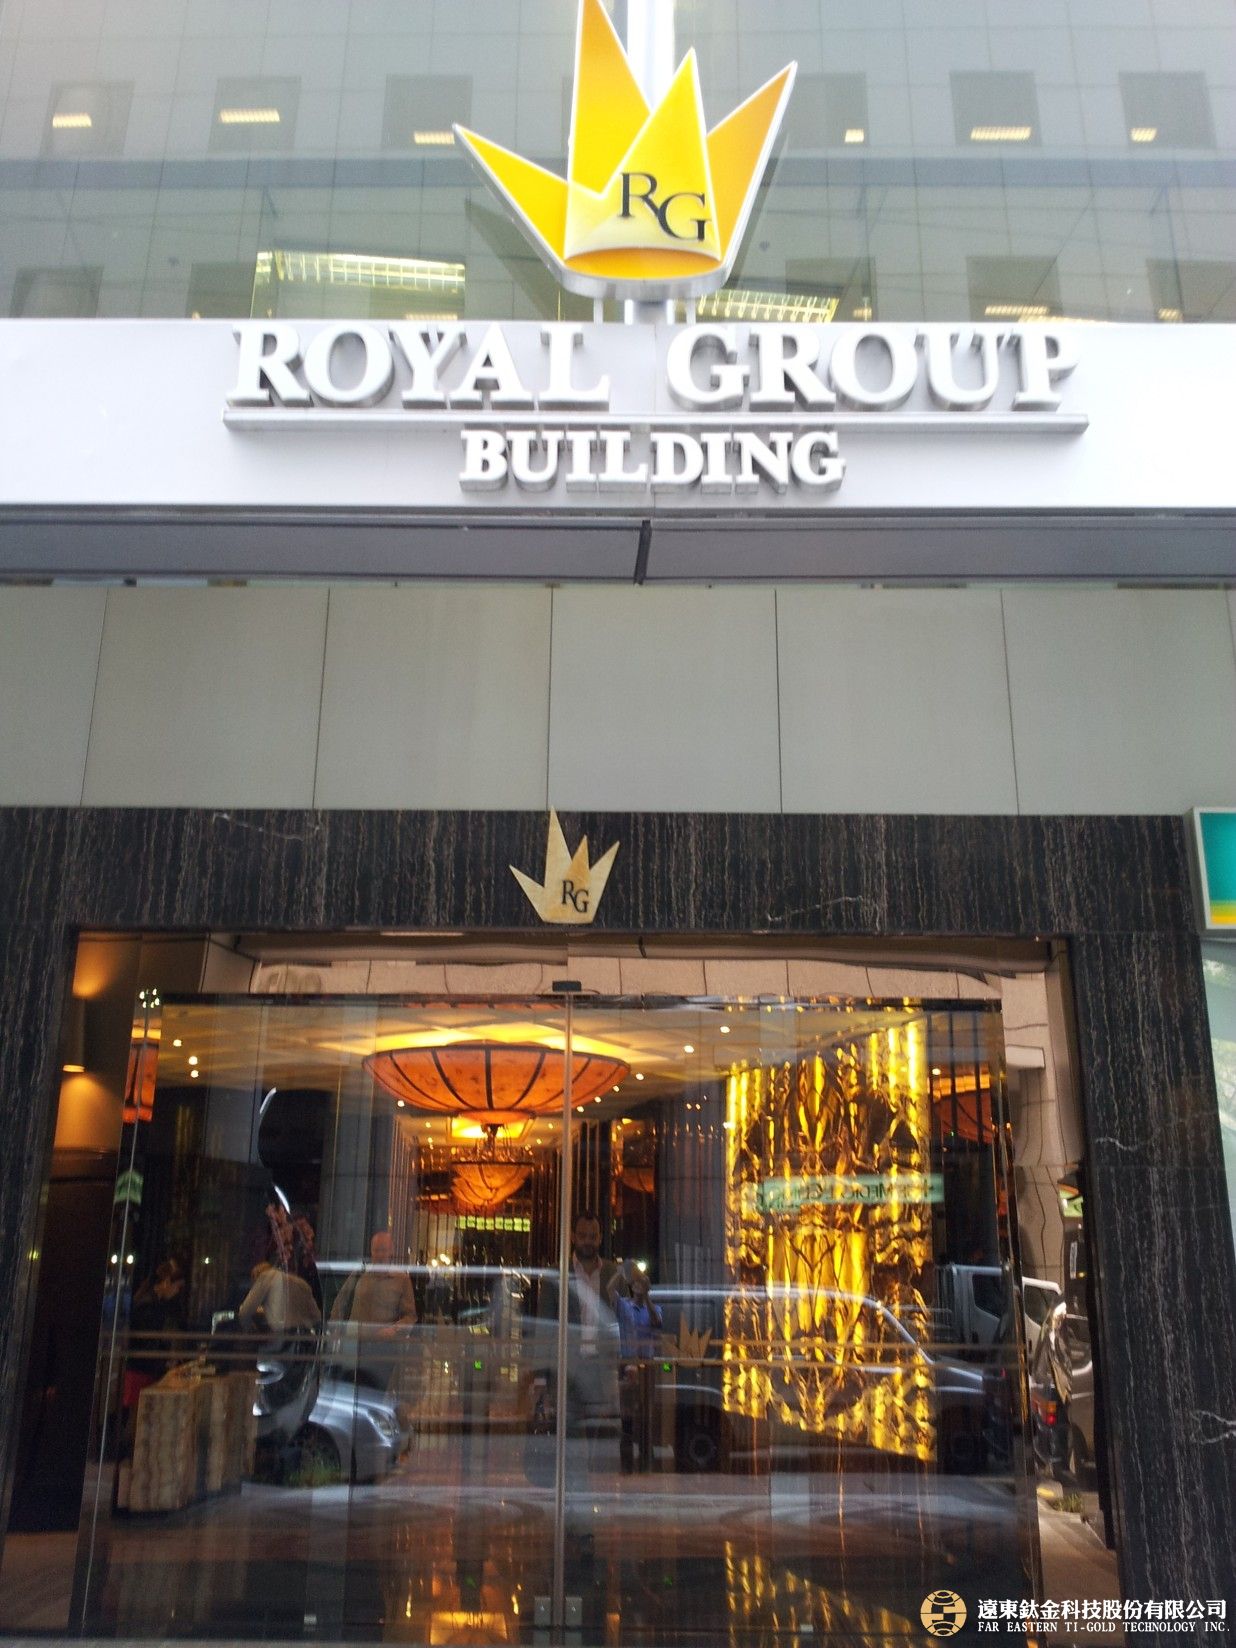 ROYAL GROUP BUILDING